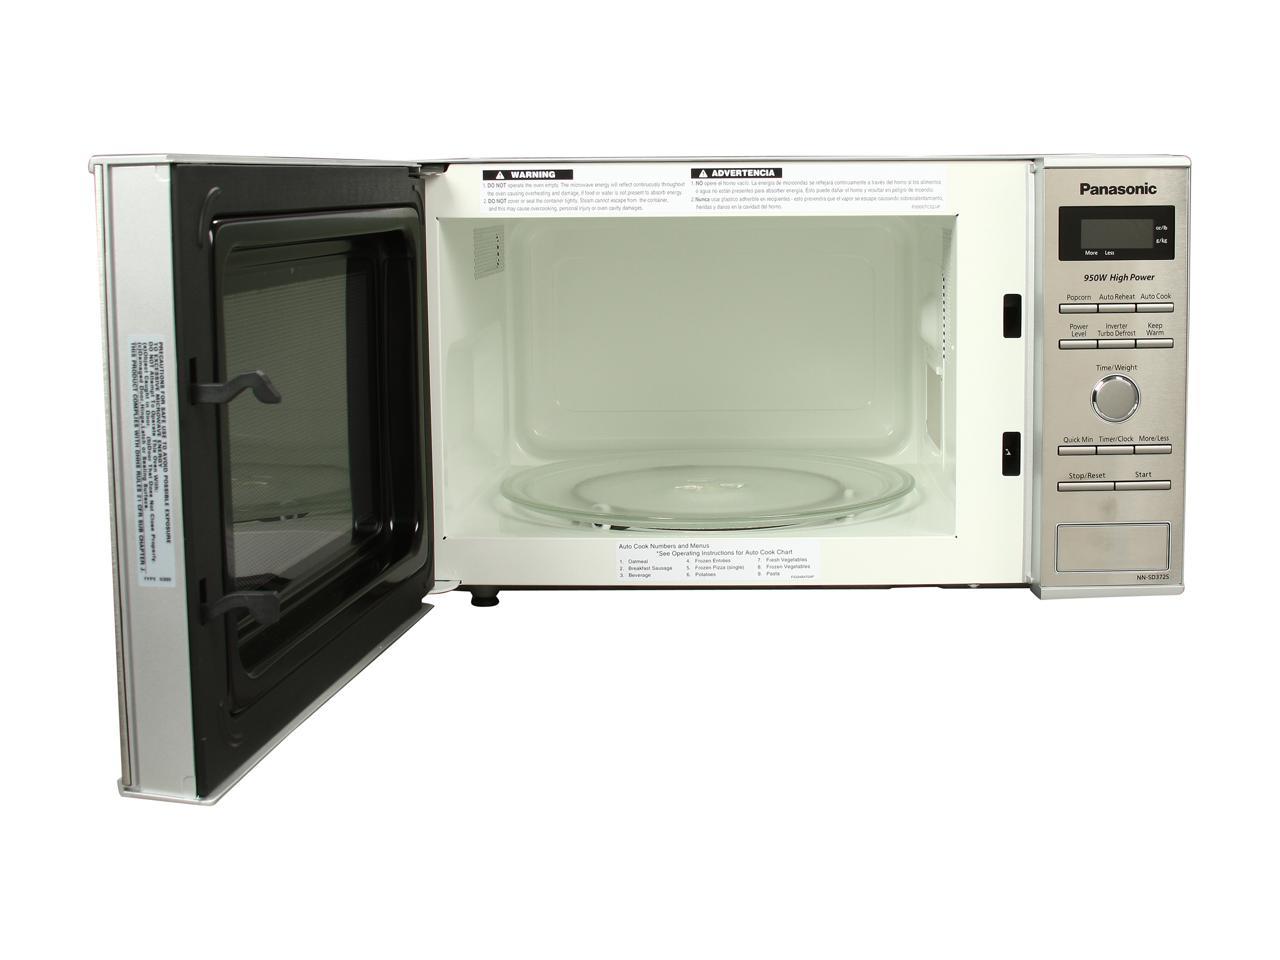 Panasonic NN-SD372S Stainless 950W 0.8 Cu. Ft. Stainless Steel Panasonic Microwave Oven Nn Sd372s Stainless Steel Countertop